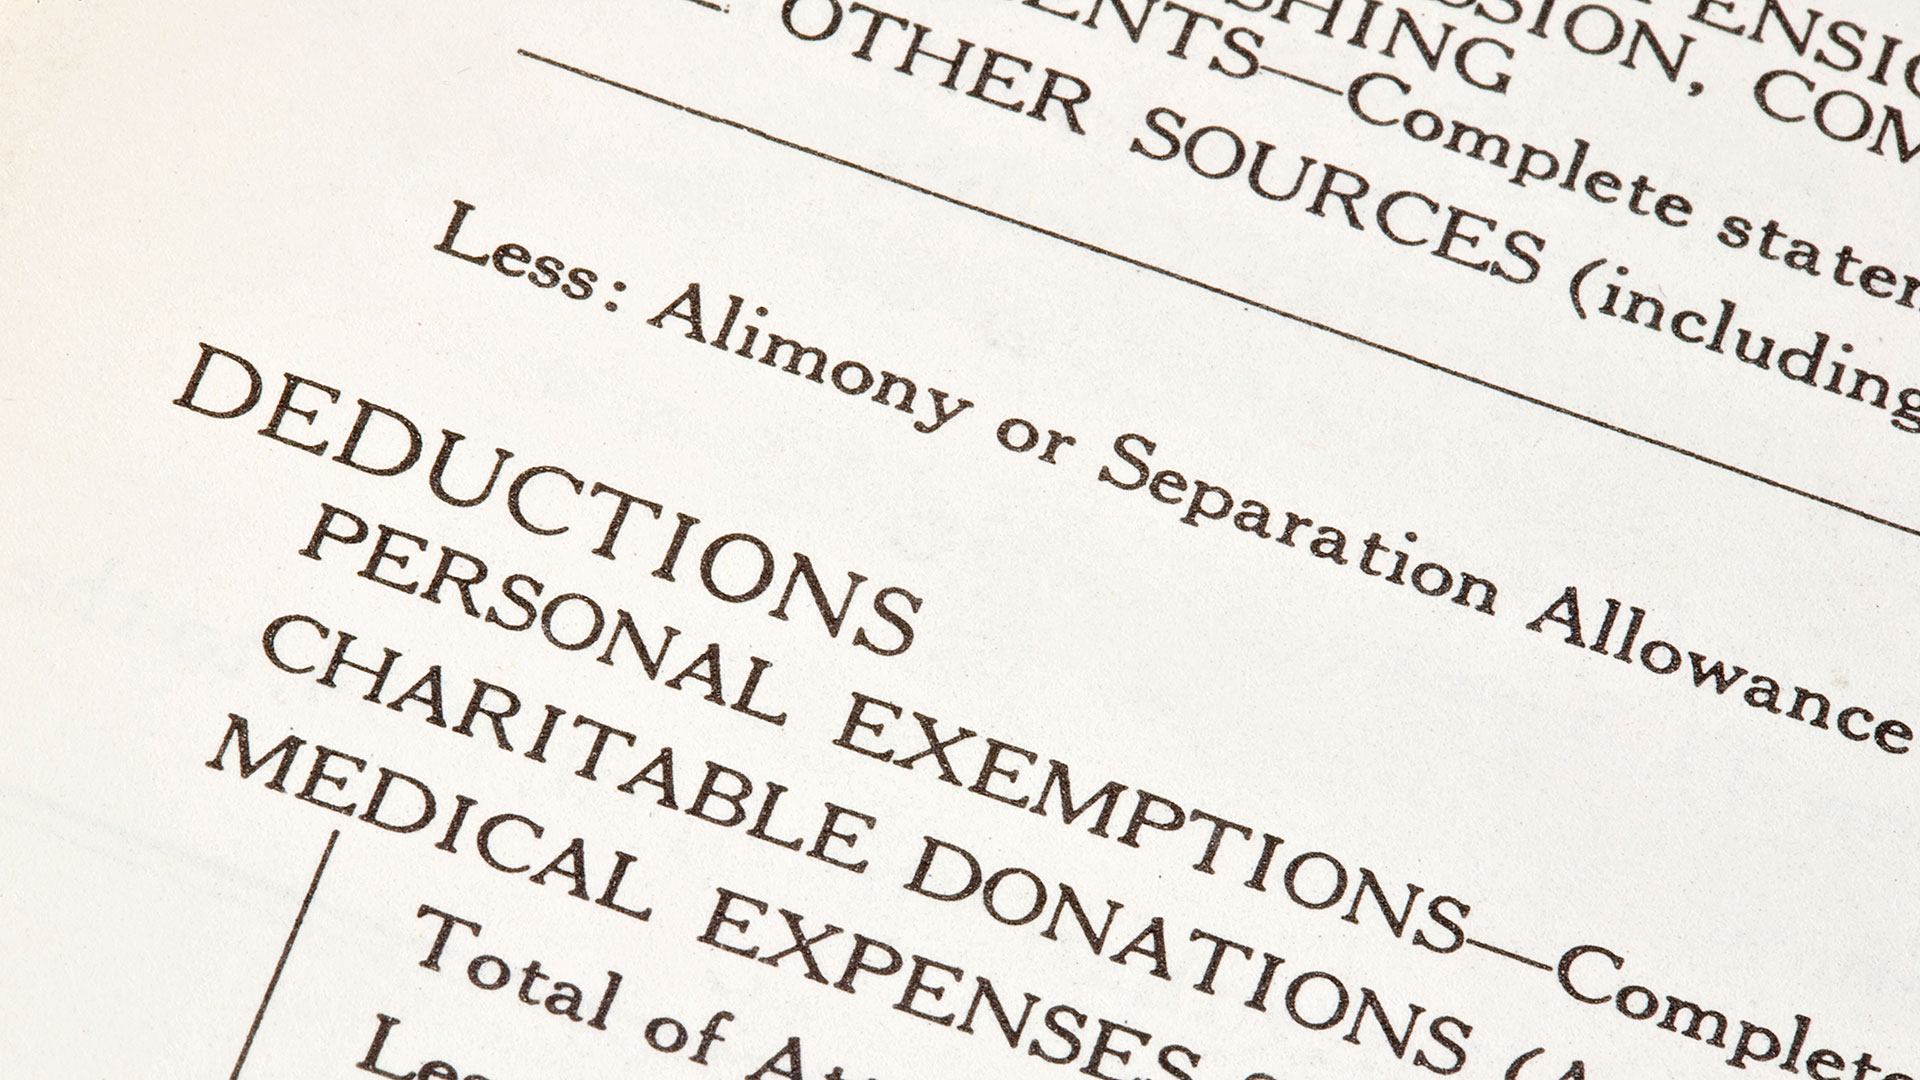 Types Of Alimony In Florida The Law Office Of William B. P.A.